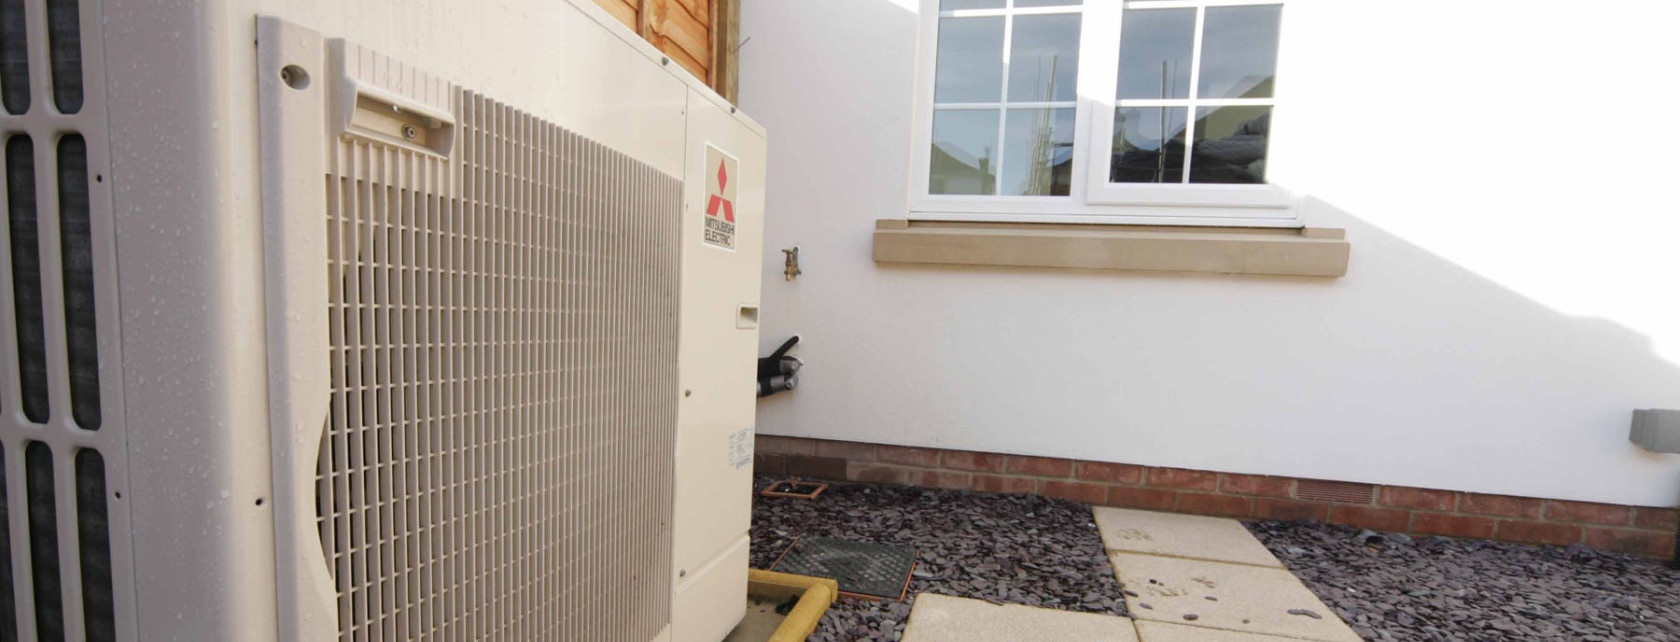 hbs mechanical air source heat pump solutions for housing developers